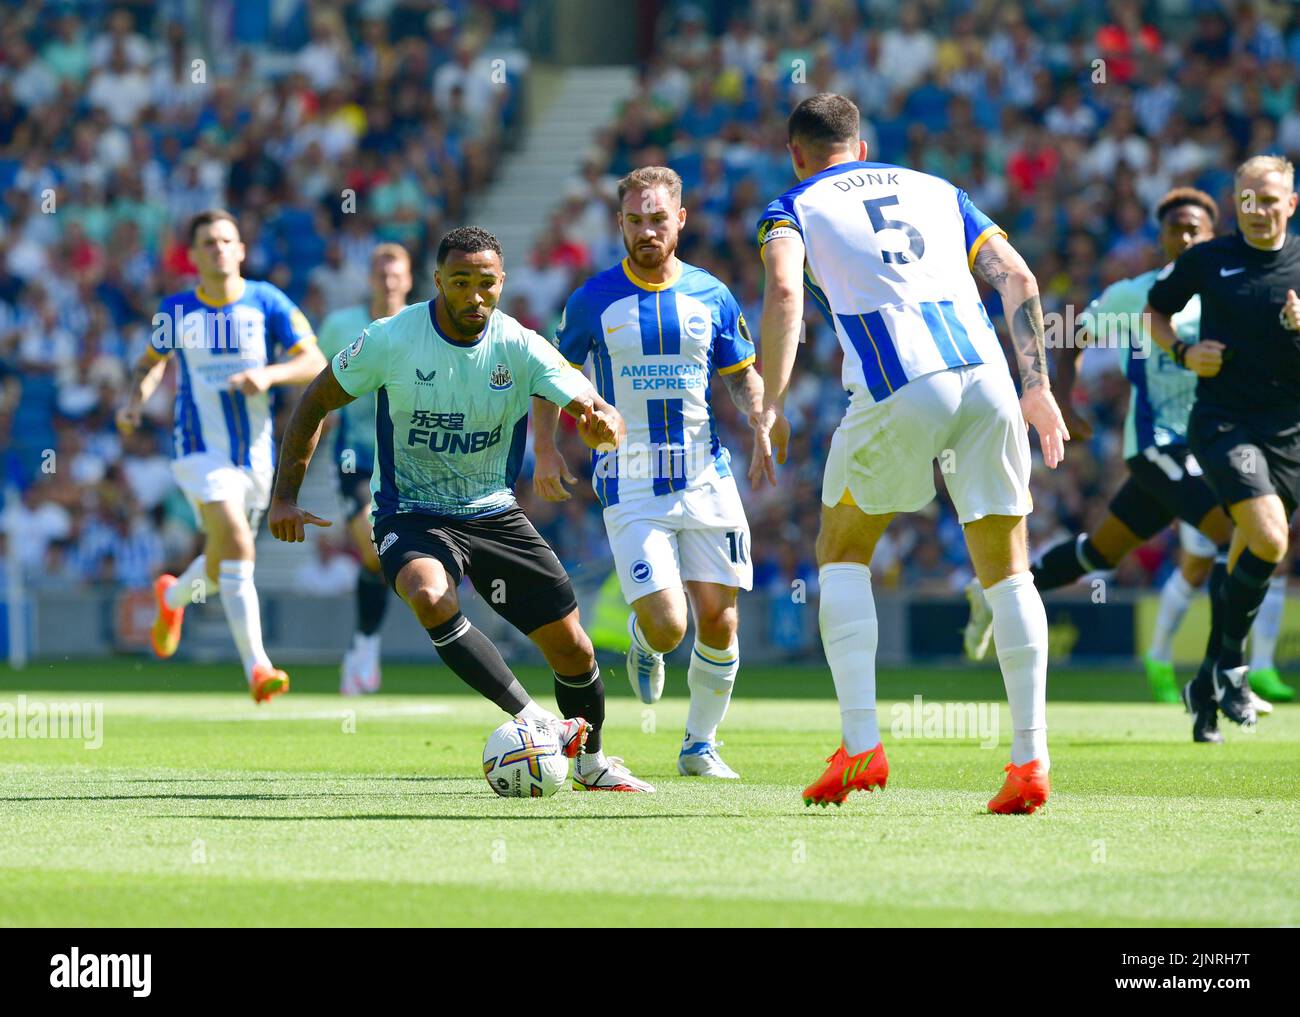 Brighton, UK. 13th Aug, 2022. Callum Wilson of Newcastle United makes a run on goal during the Premier League match between Brighton & Hove Albion and Newcastle United at The Amex on August 13th 2022 in Brighton, England. (Photo by Jeff Mood/phcimages.com) Credit: PHC Images/Alamy Live News Stock Photo